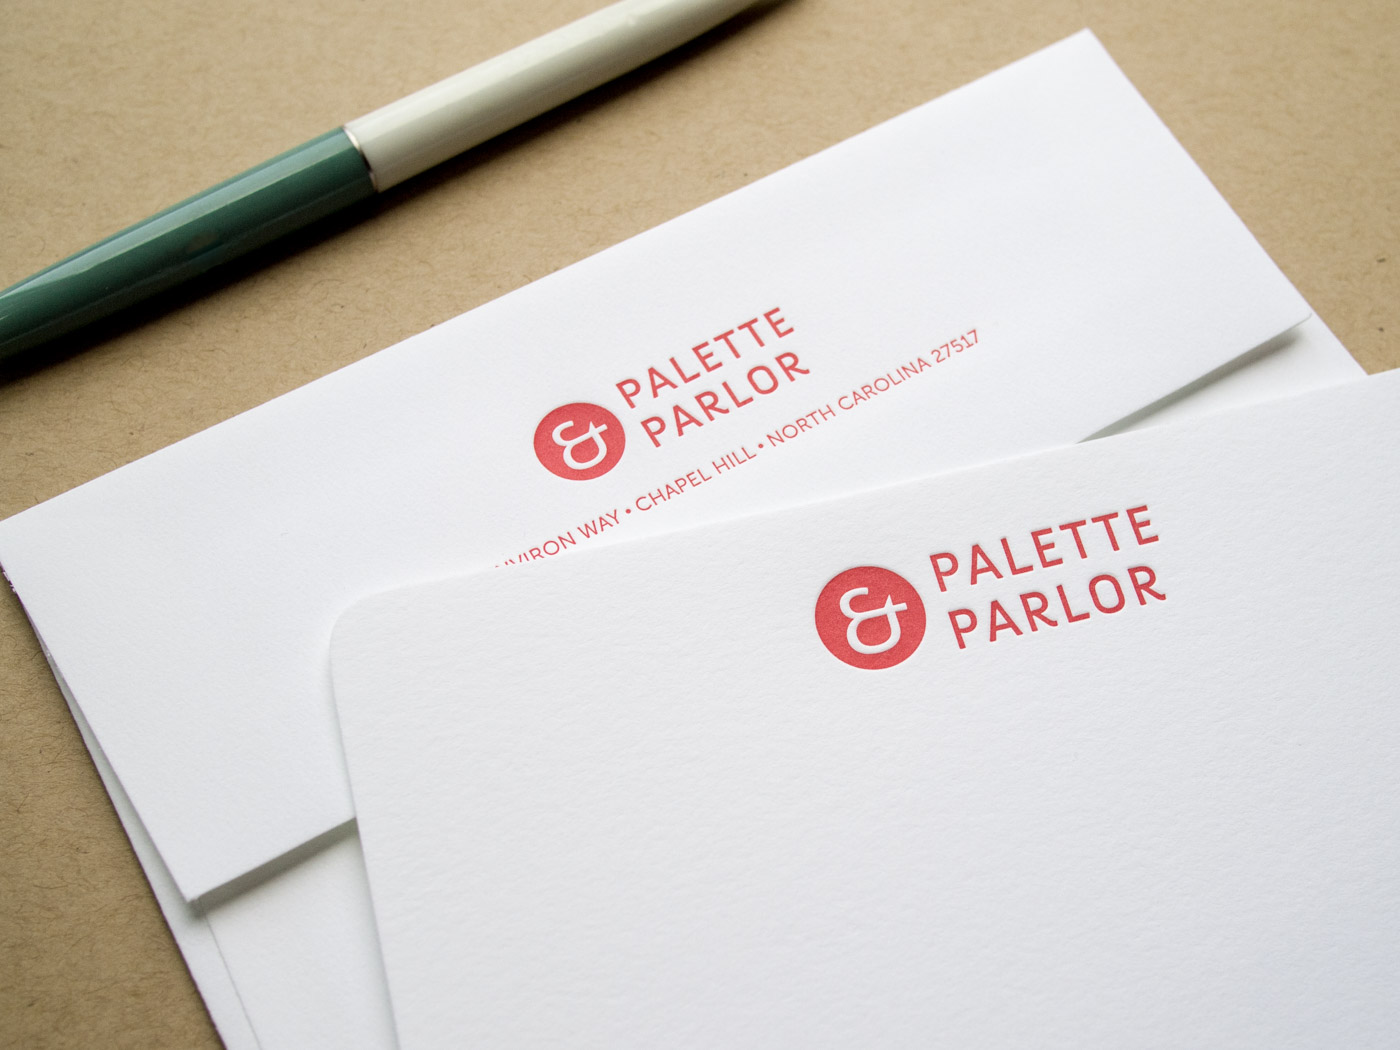 Palette and Parlor | Printed by Parklife Press